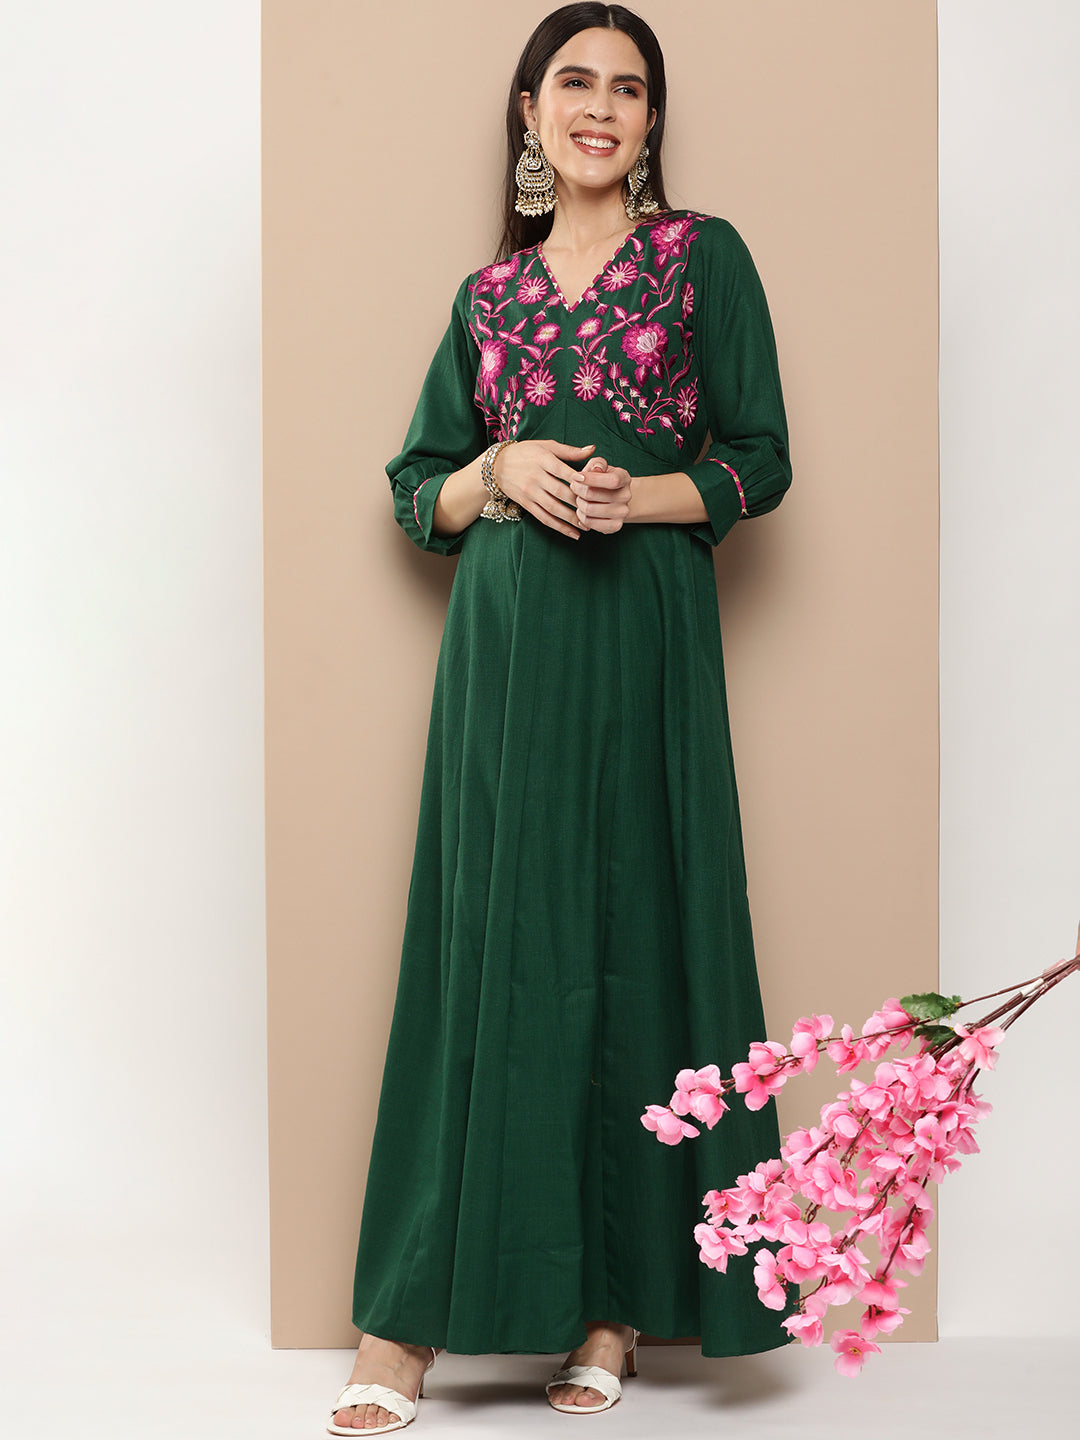 Women's Green Embroidered Long Dress With Waist Belt - Bhama Couture